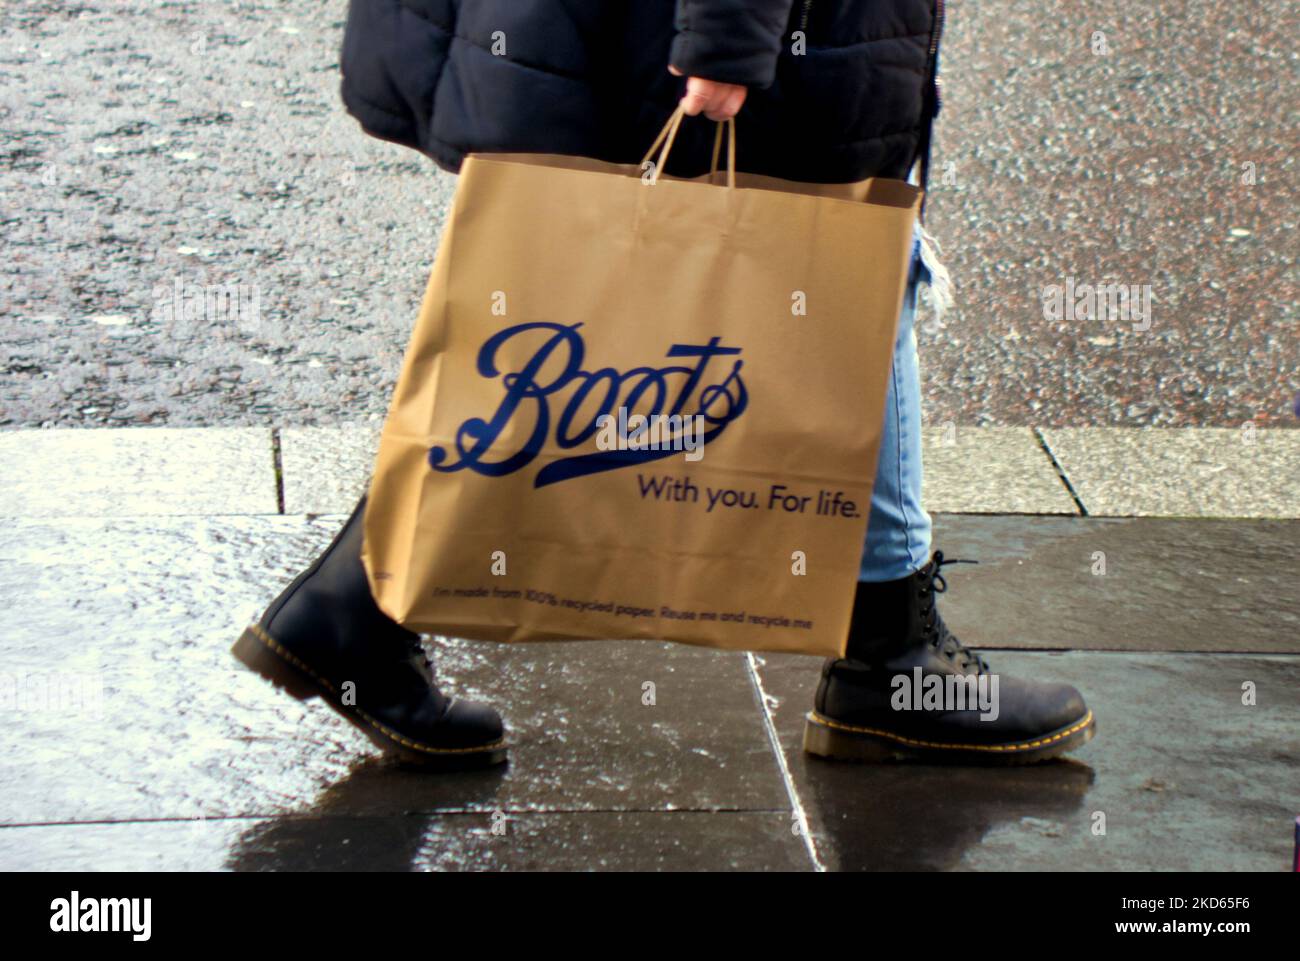 boots the chemist bag walking customer in boots close up Stock Photo